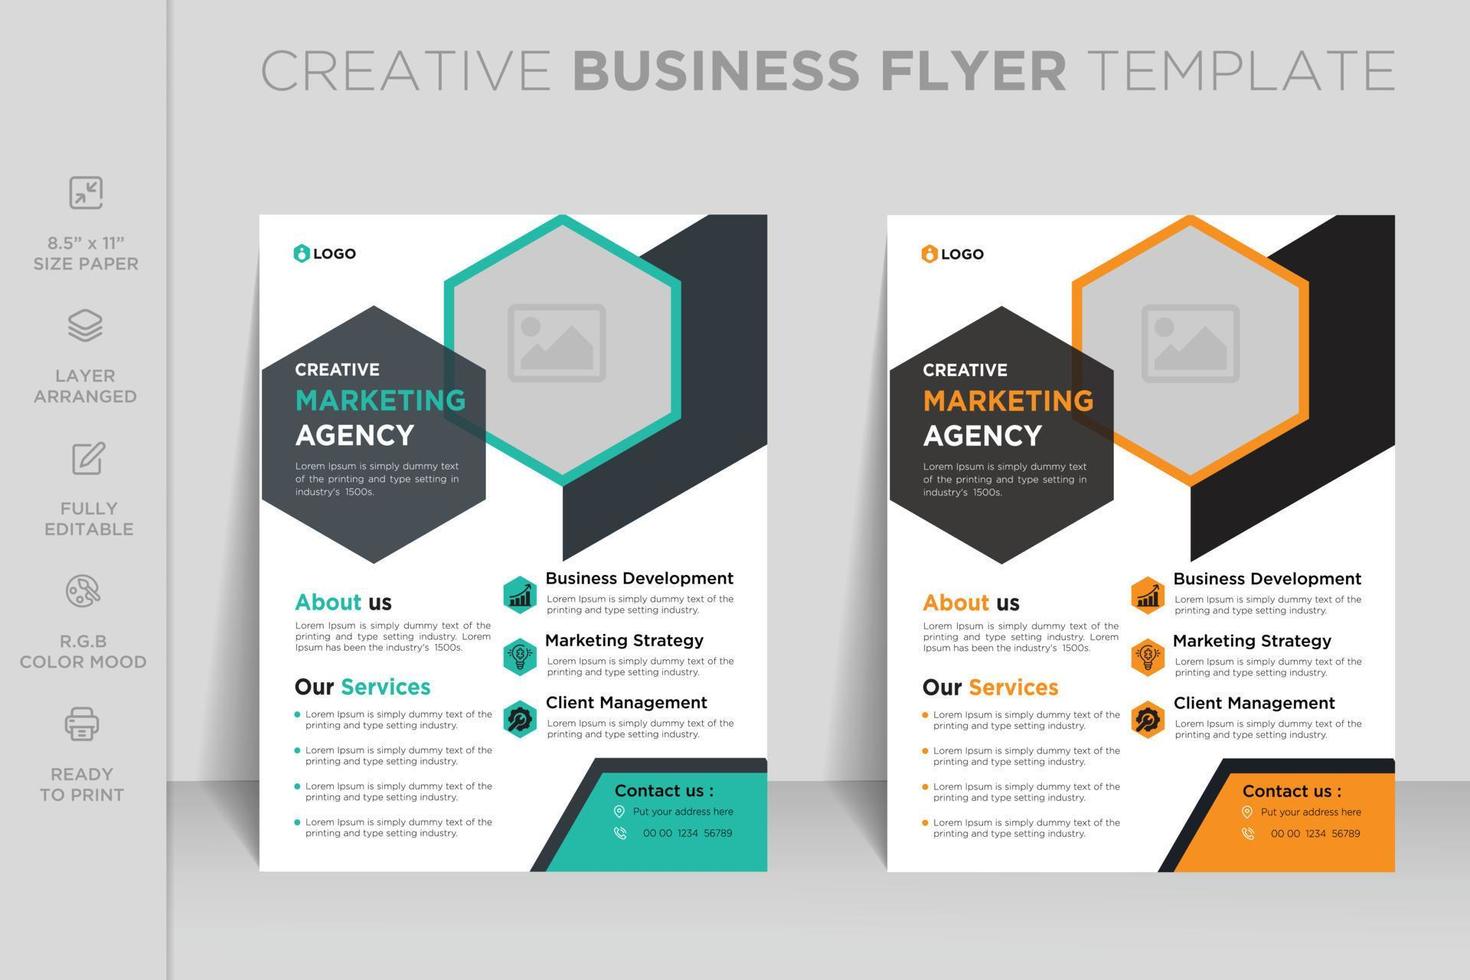 Professional digital marketing agency and corporate business flyer or brochure template design vector